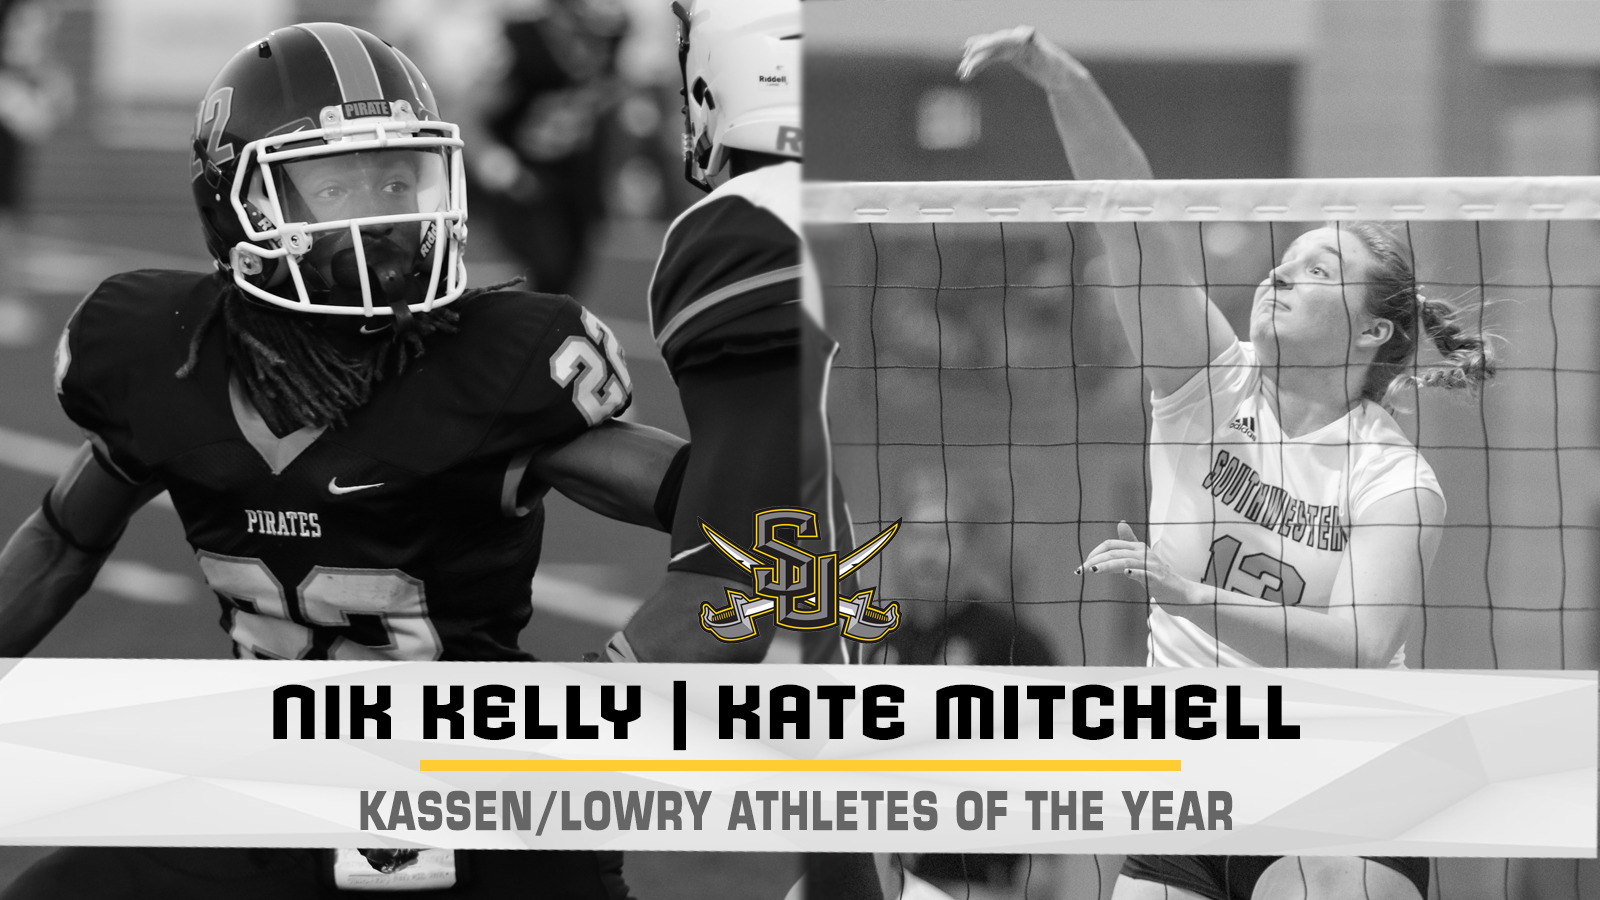 Kelly, Mitchell Named Kassen/Lowry Athletes of the Year